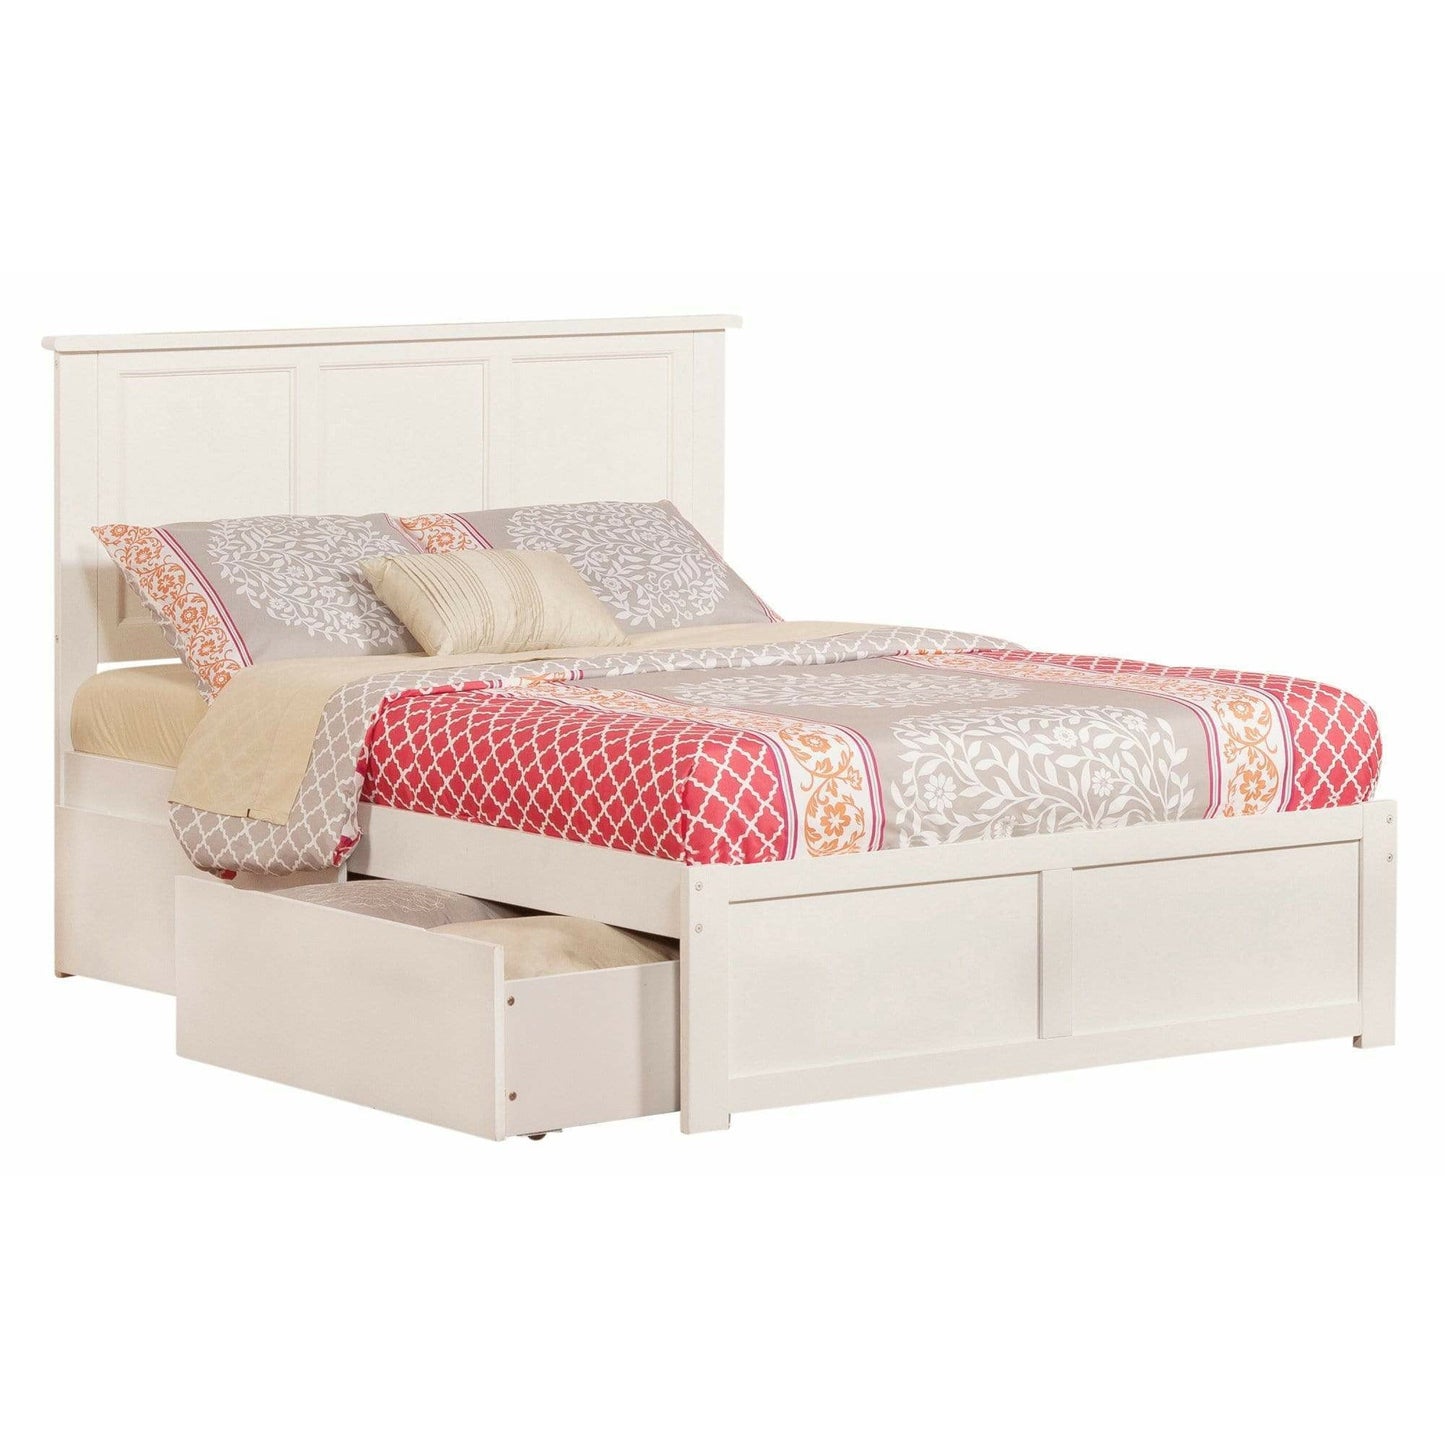 Atlantic Furniture Bed White Madison Full Platform Bed with Flat Panel Foot Board and 2 Urban Bed Drawers in Espresso